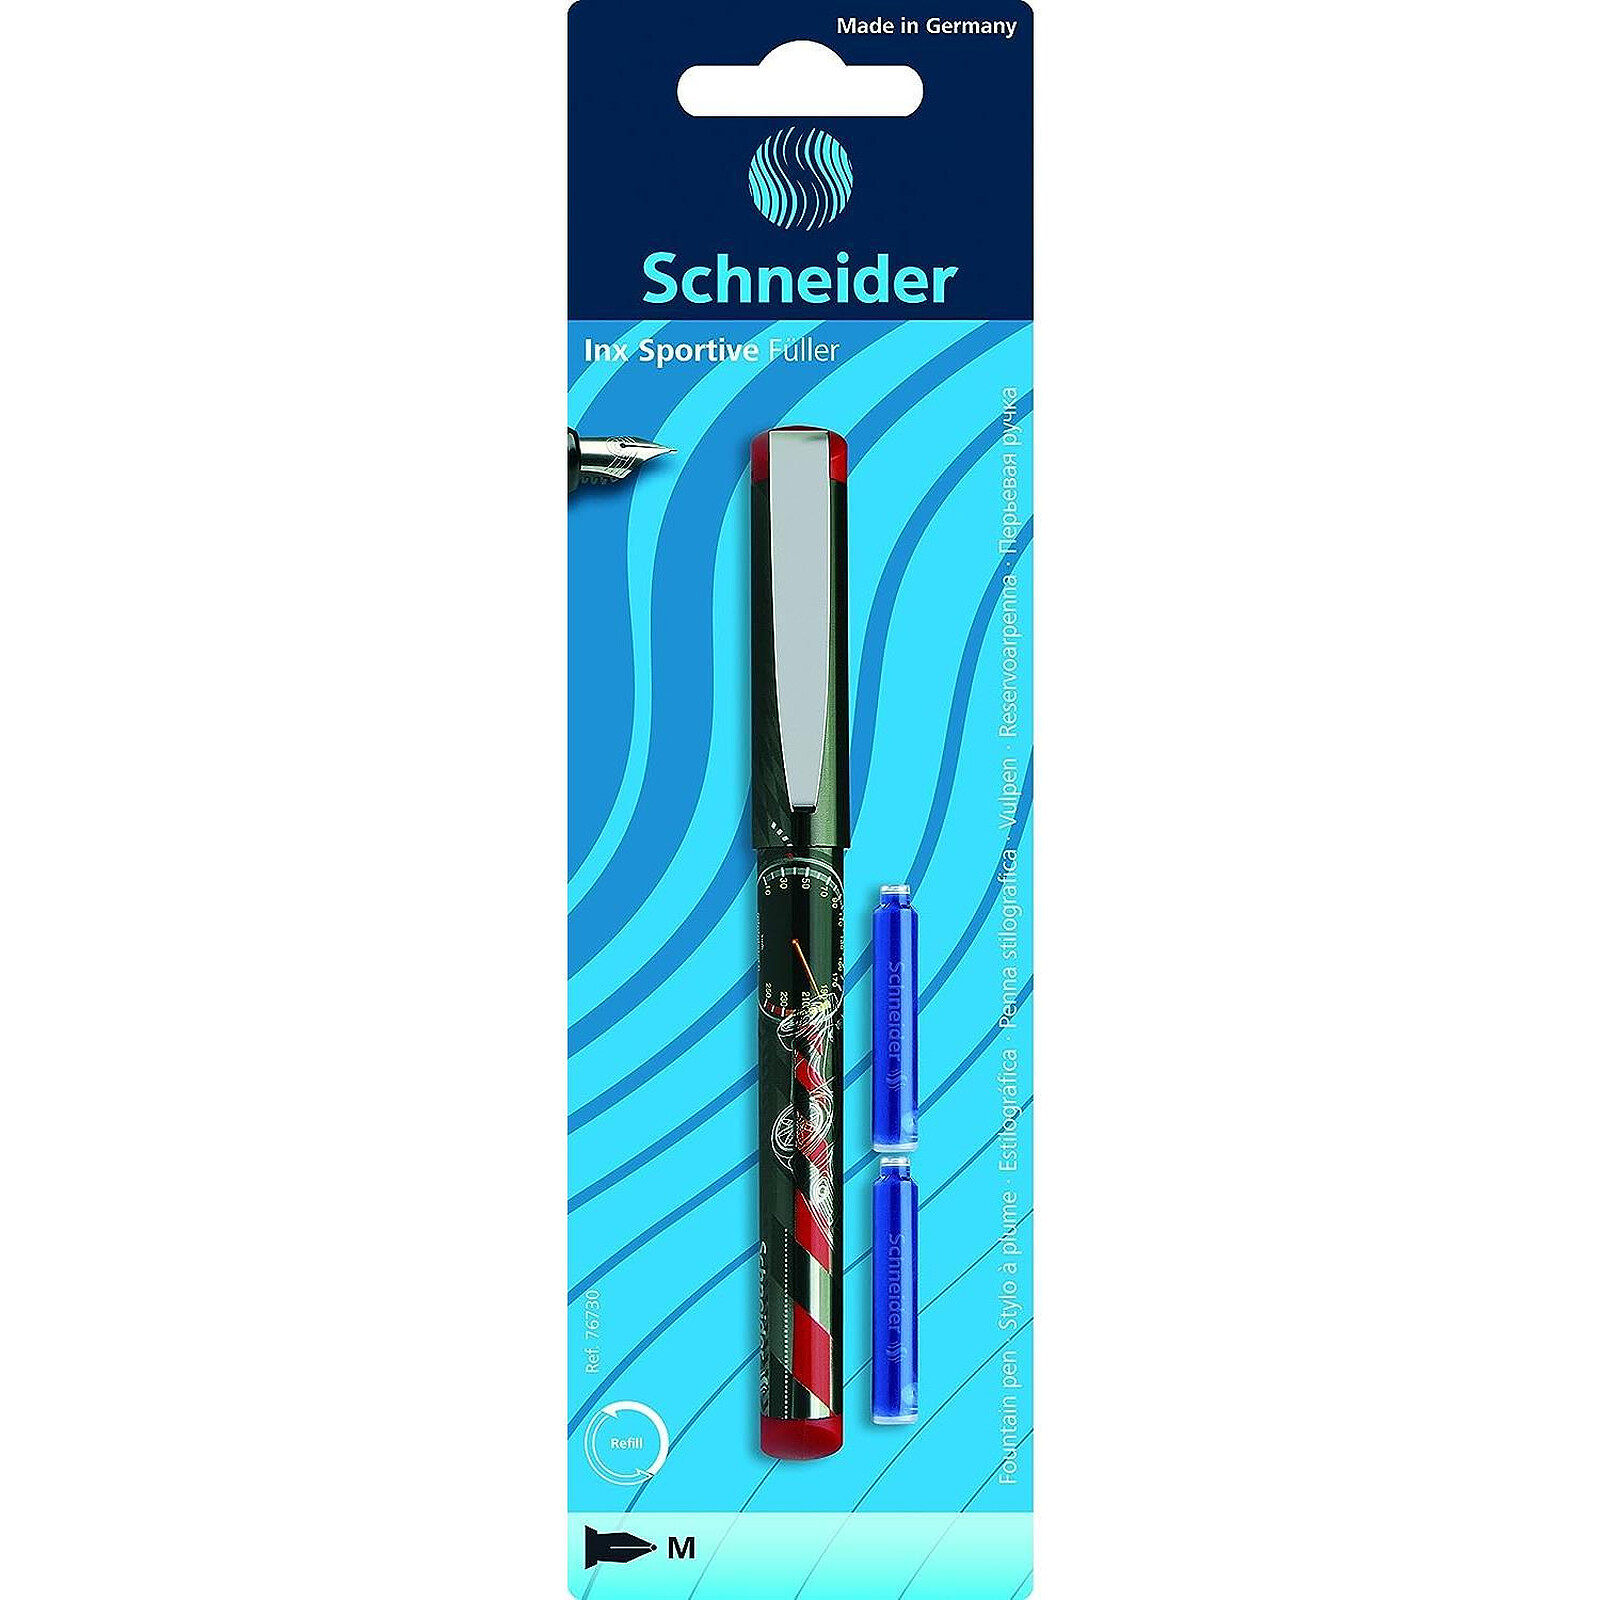 Schneider One Change - 5 cartouches d'encre pour stylo plume - rouge